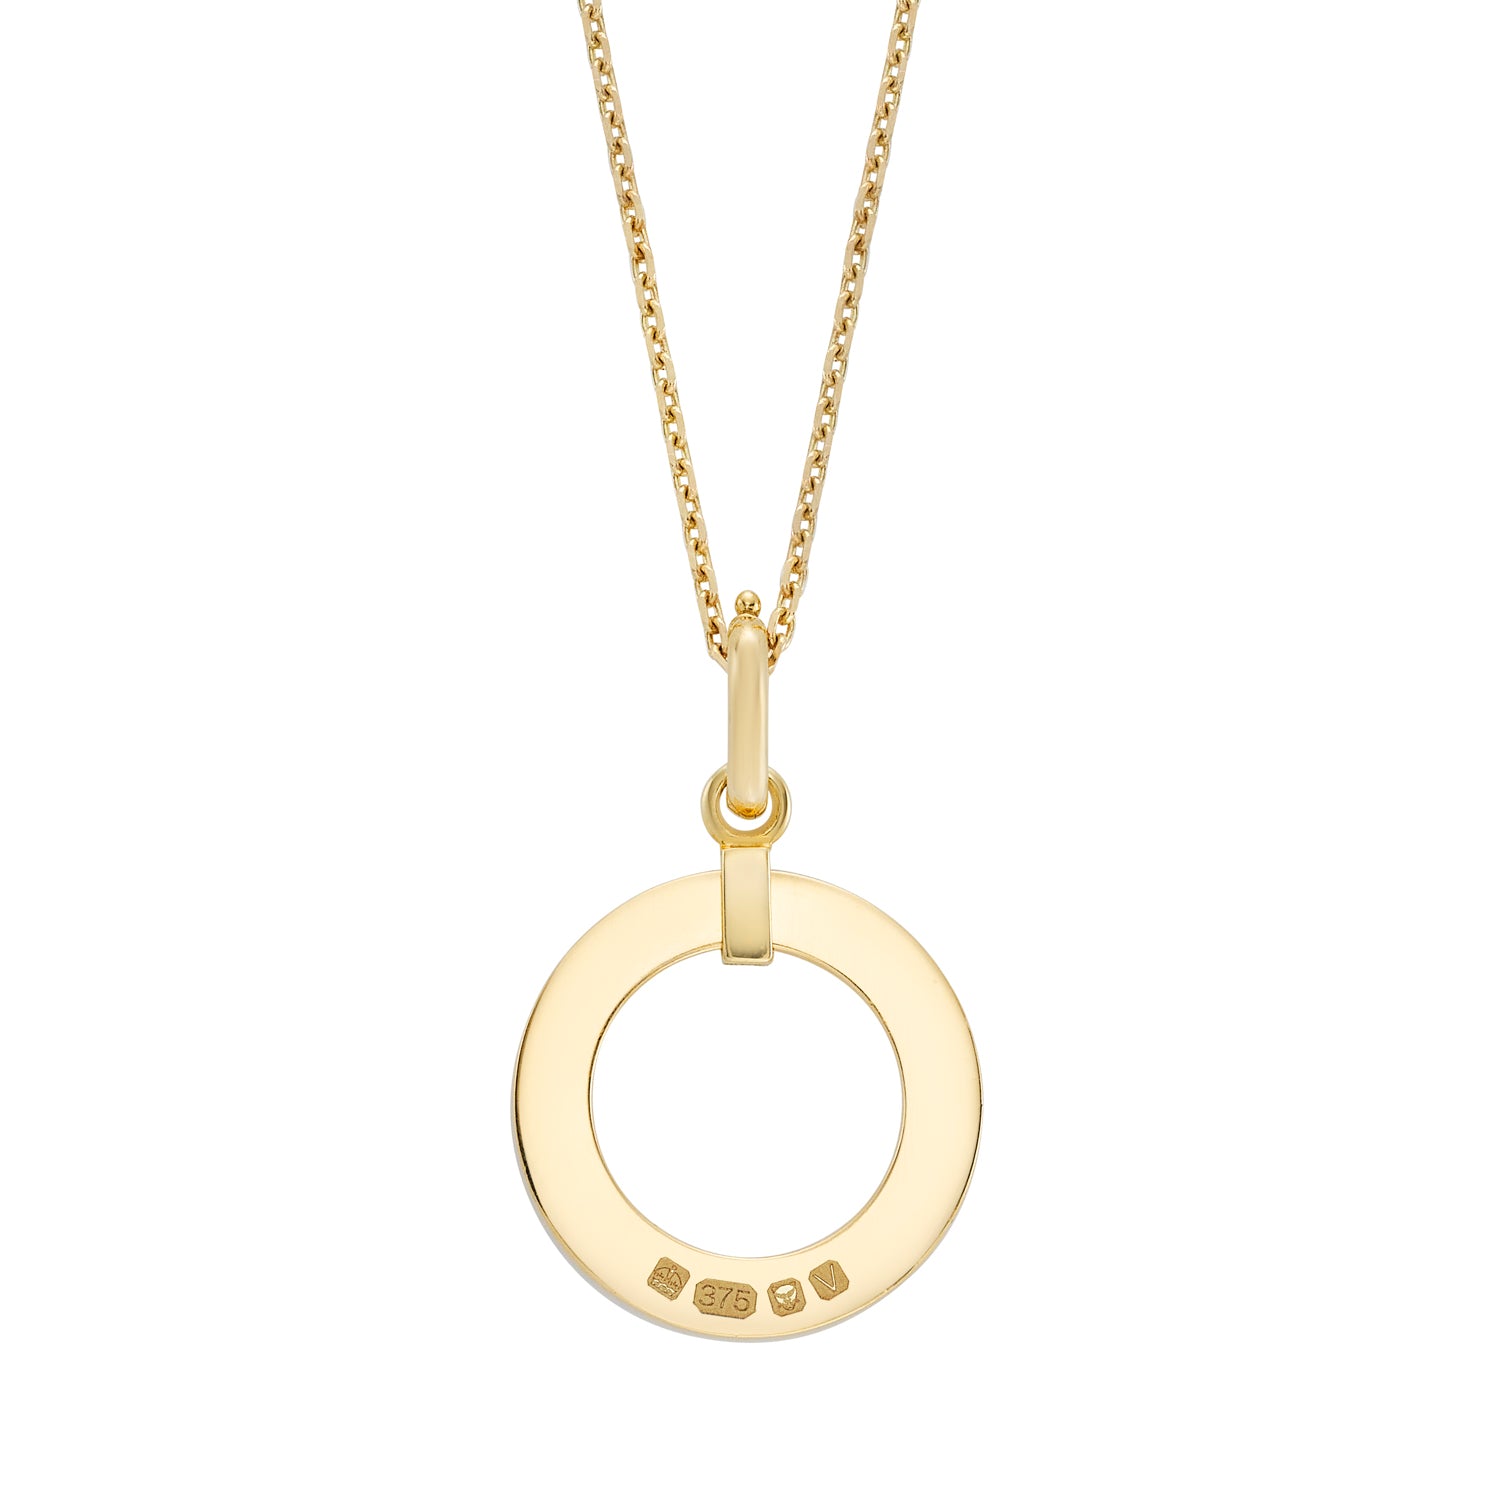 metier by tomfoolery: London Ouvert Round Pendant